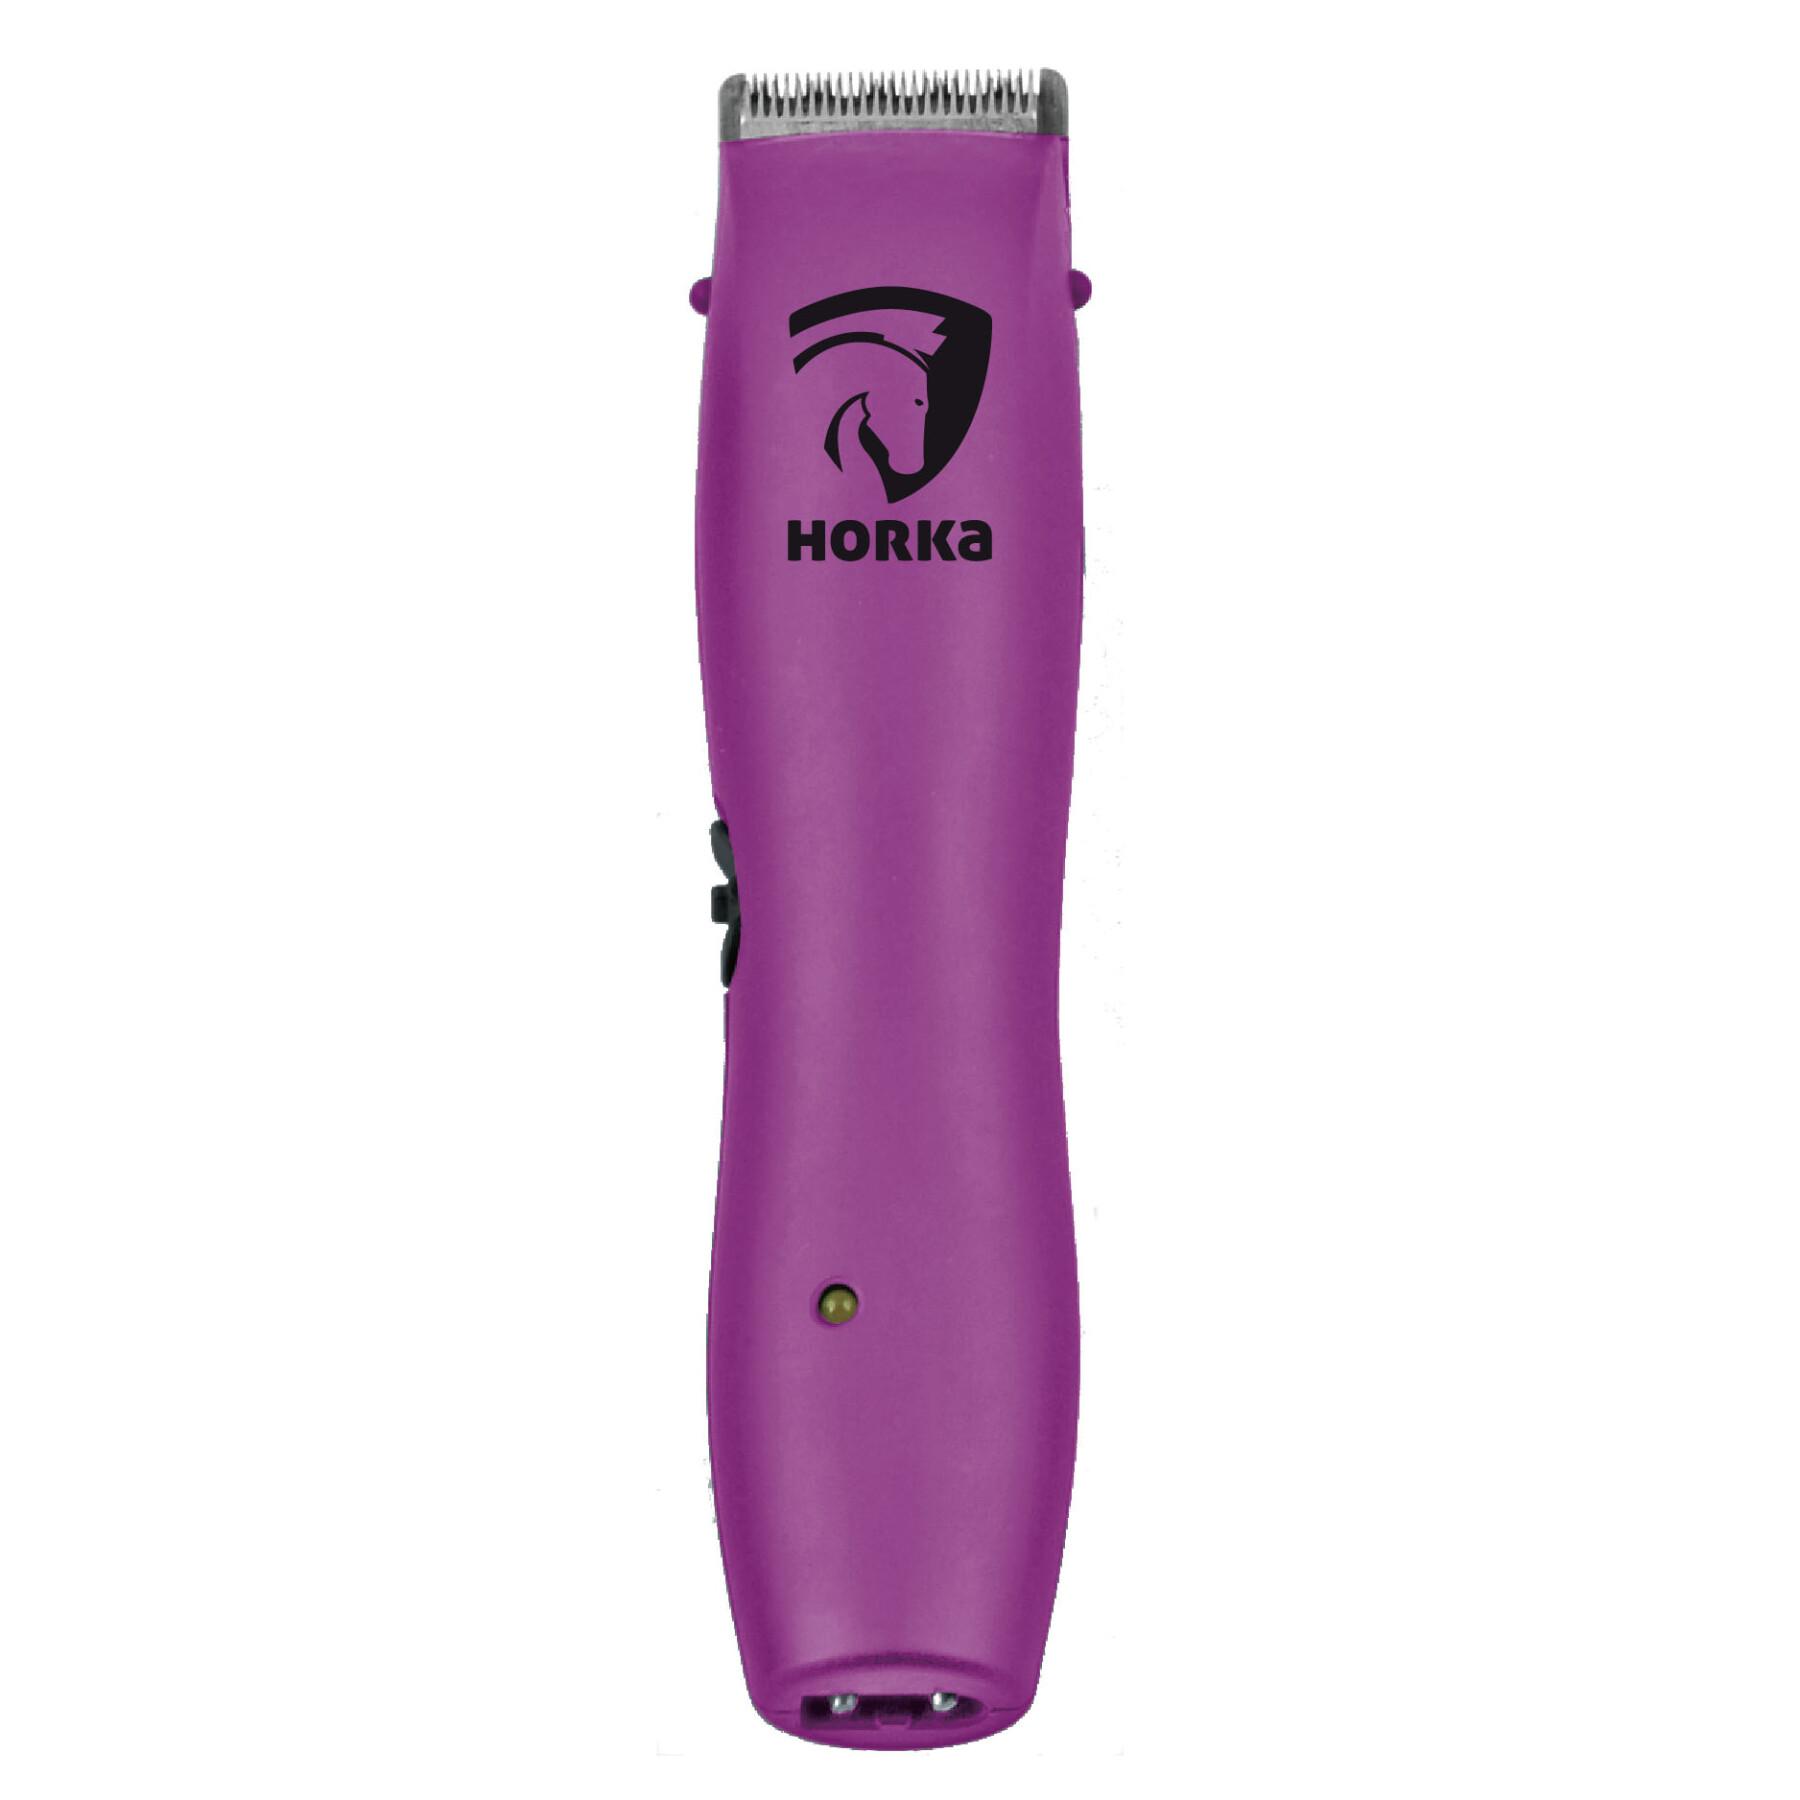 Cordless horse clippers Horka Mini professional